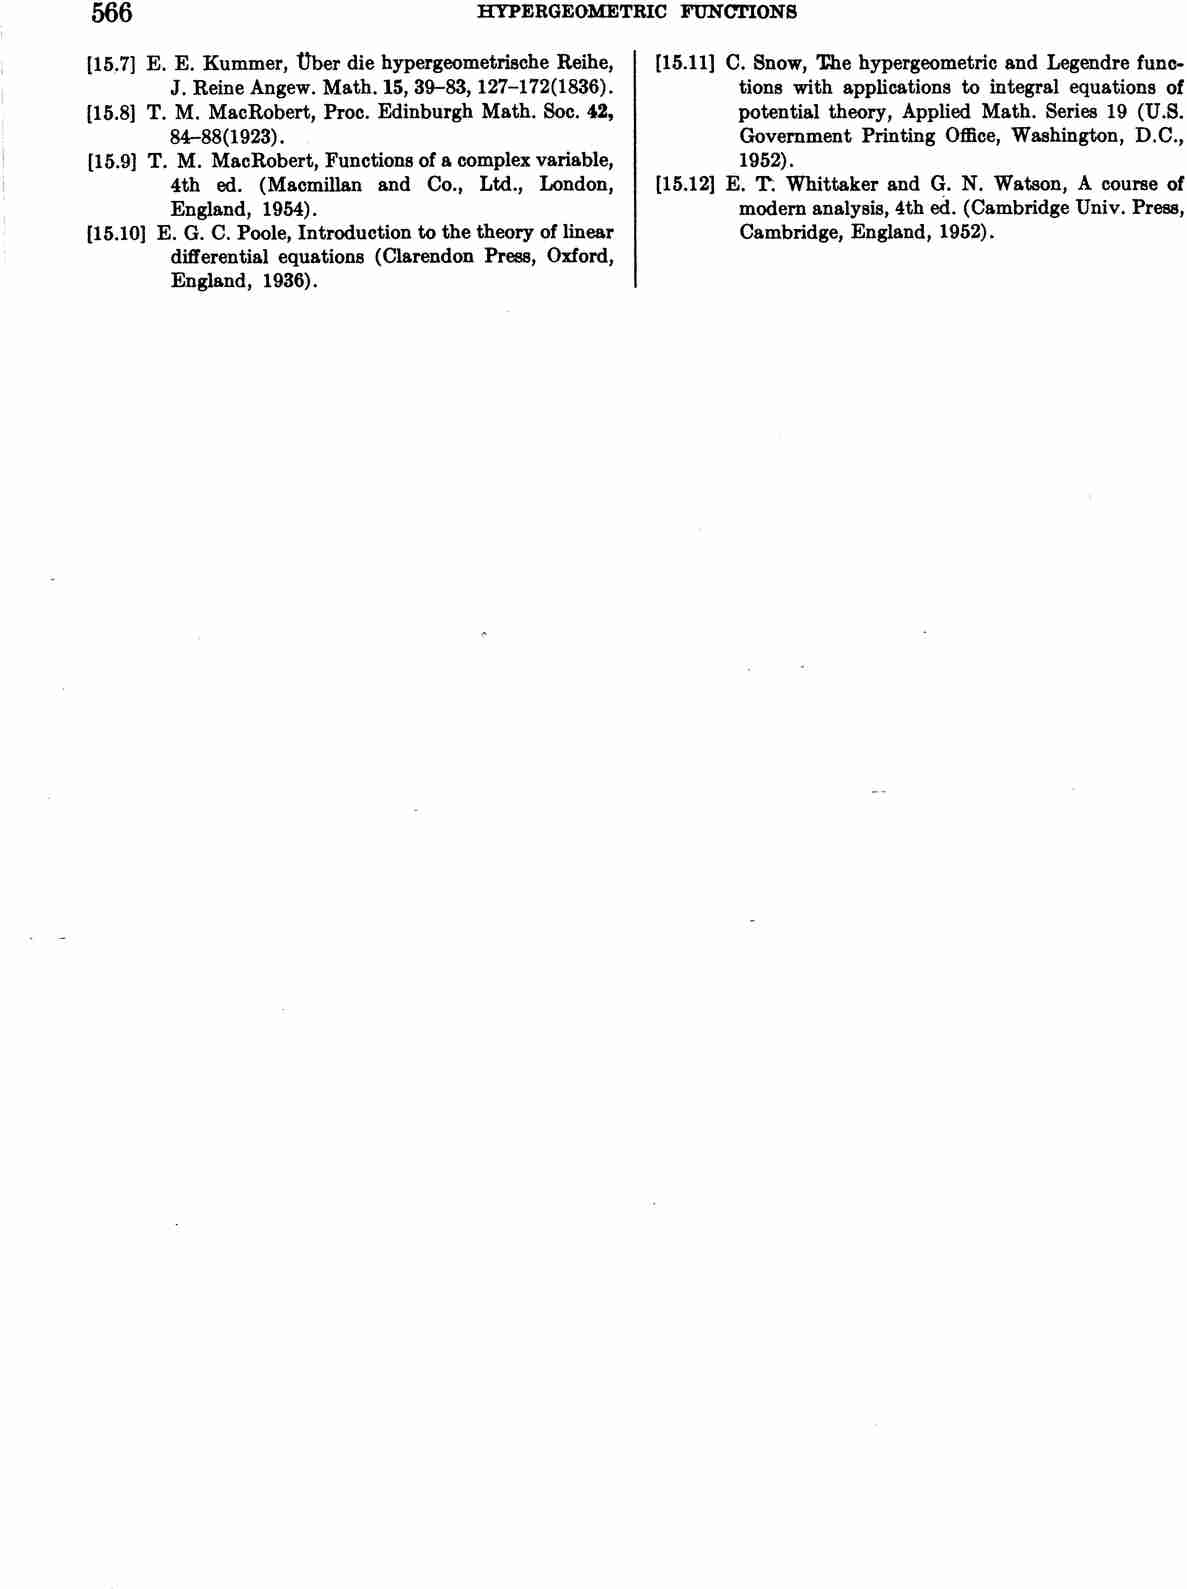 image of page 566